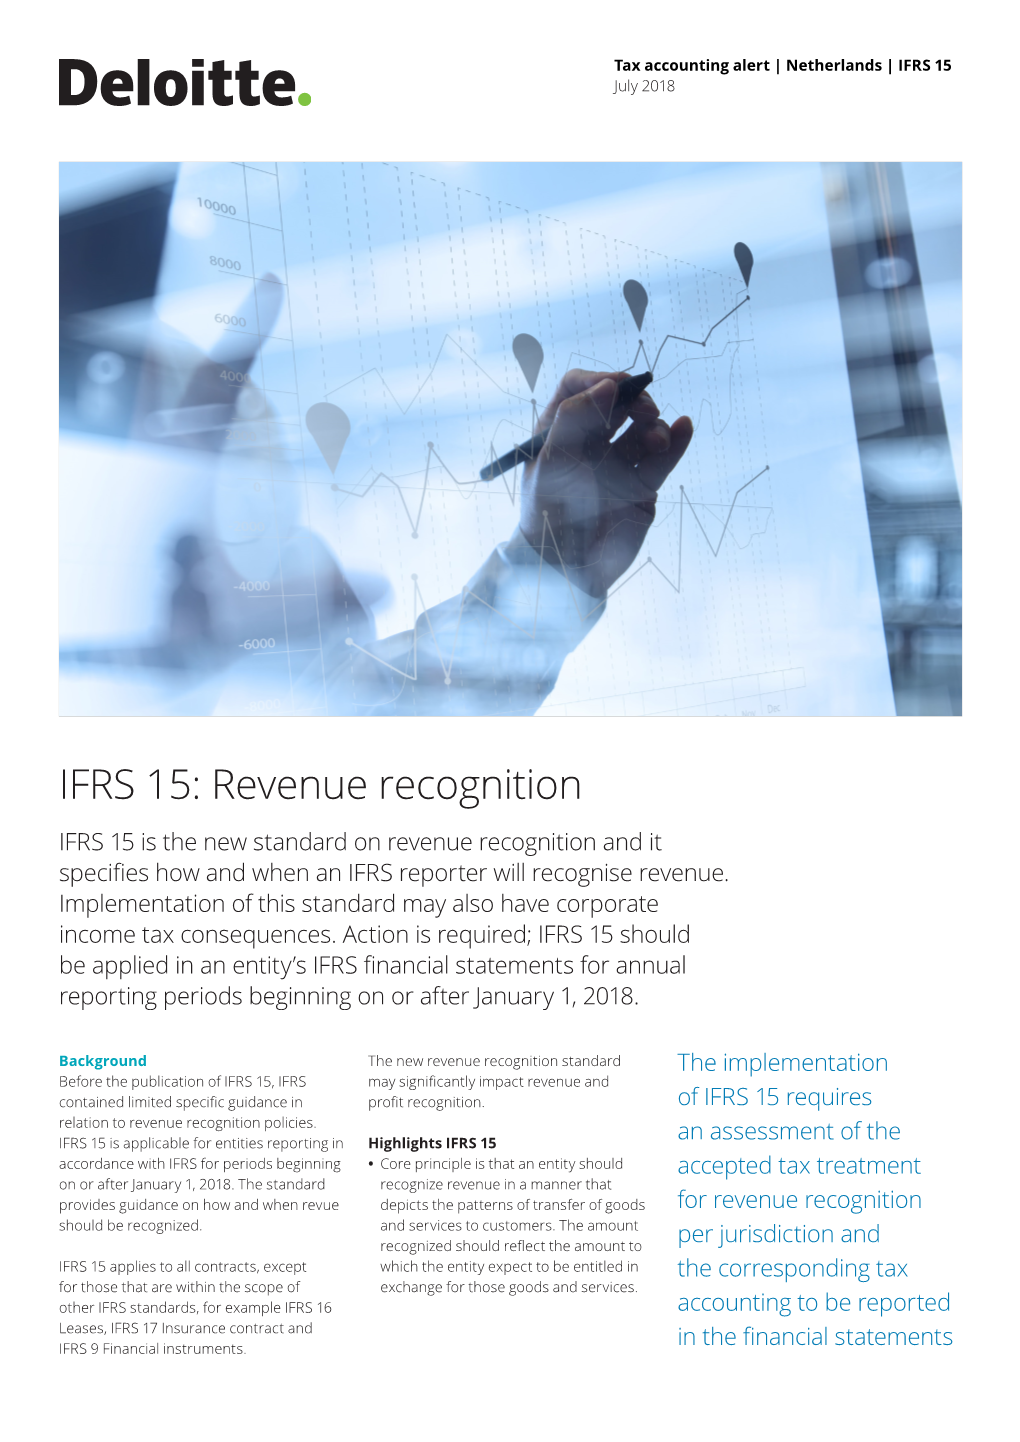 IFRS 15: Revenue Recognition IFRS 15 Is the New Standard on Revenue Recognition and It Specifies How and When an IFRS Reporter Will Recognise Revenue